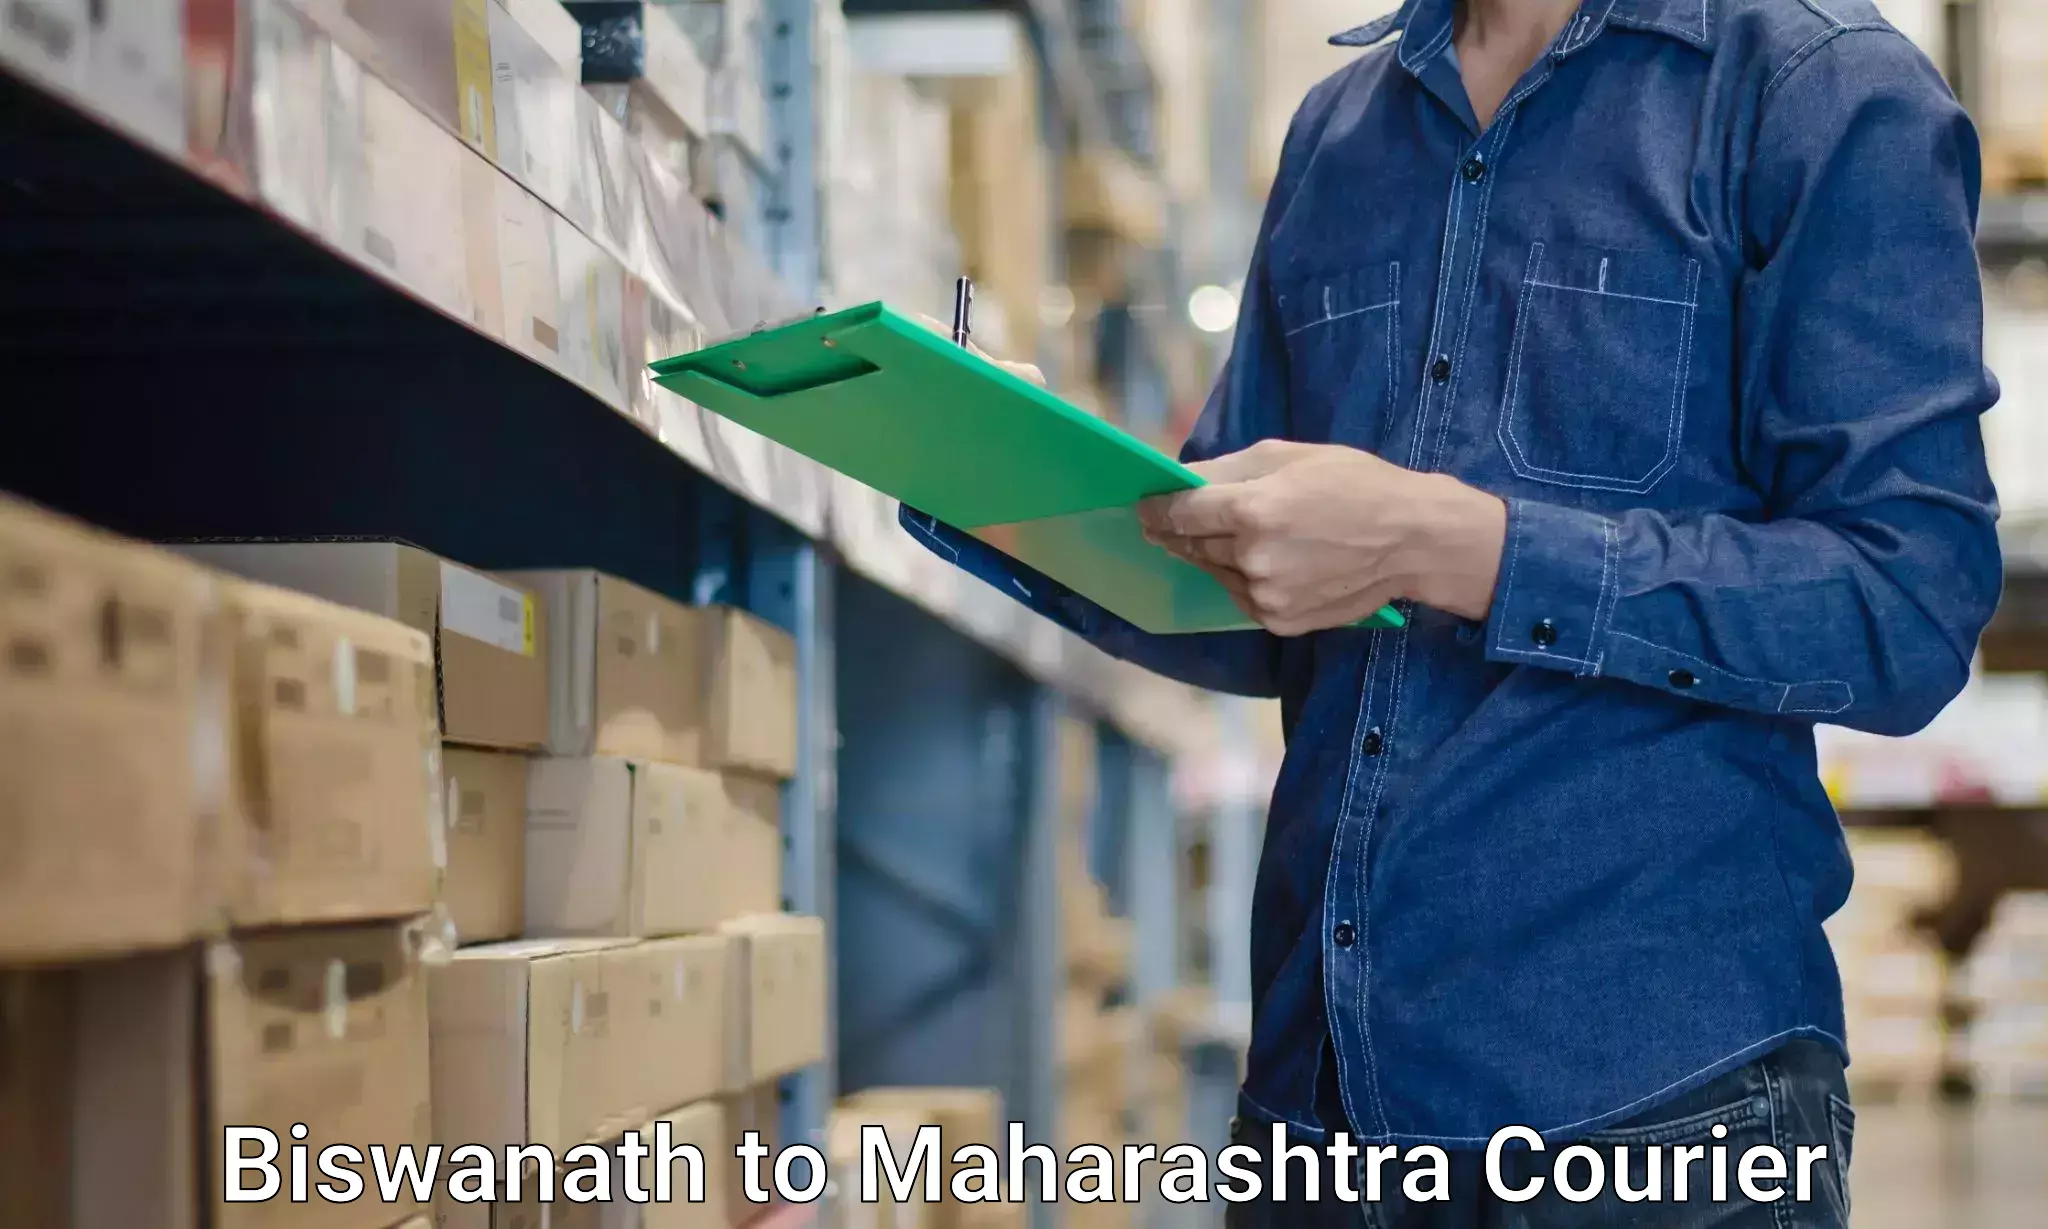 Professional moving company Biswanath to Osmanabad